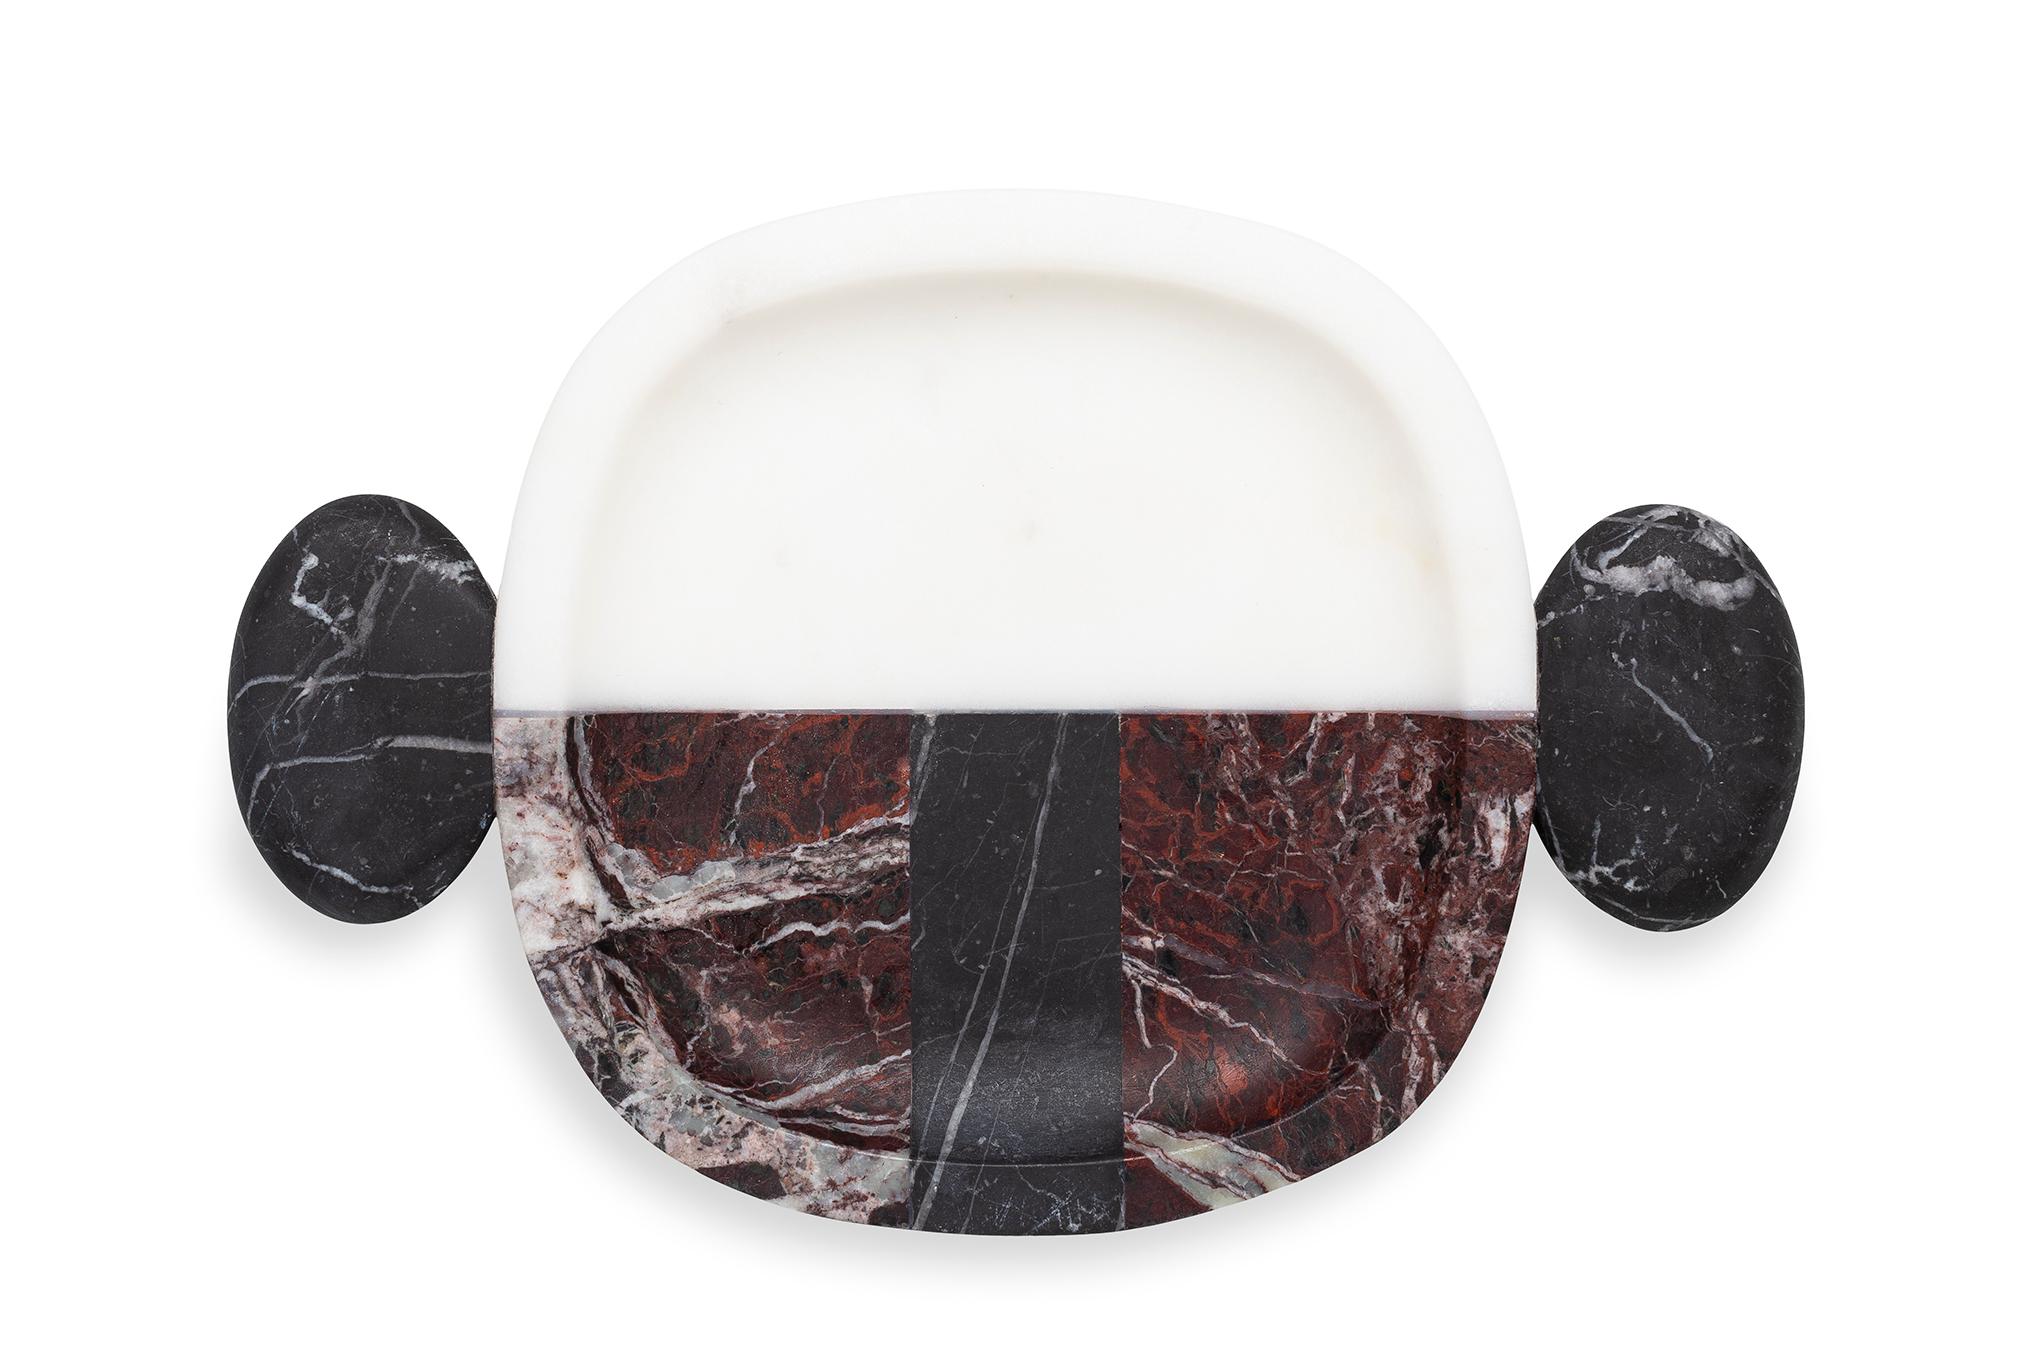 Carlo small plate by Matteo Cibic
Dimensions: 22.5 x 15 x 2 cm
Materials: Nero Marquinia, Bianco Michelangelo, Rosso Levanto

Please note that the Cibic pieces with “ears” or tray handles are ornamental and not functional. 
Use them can cause